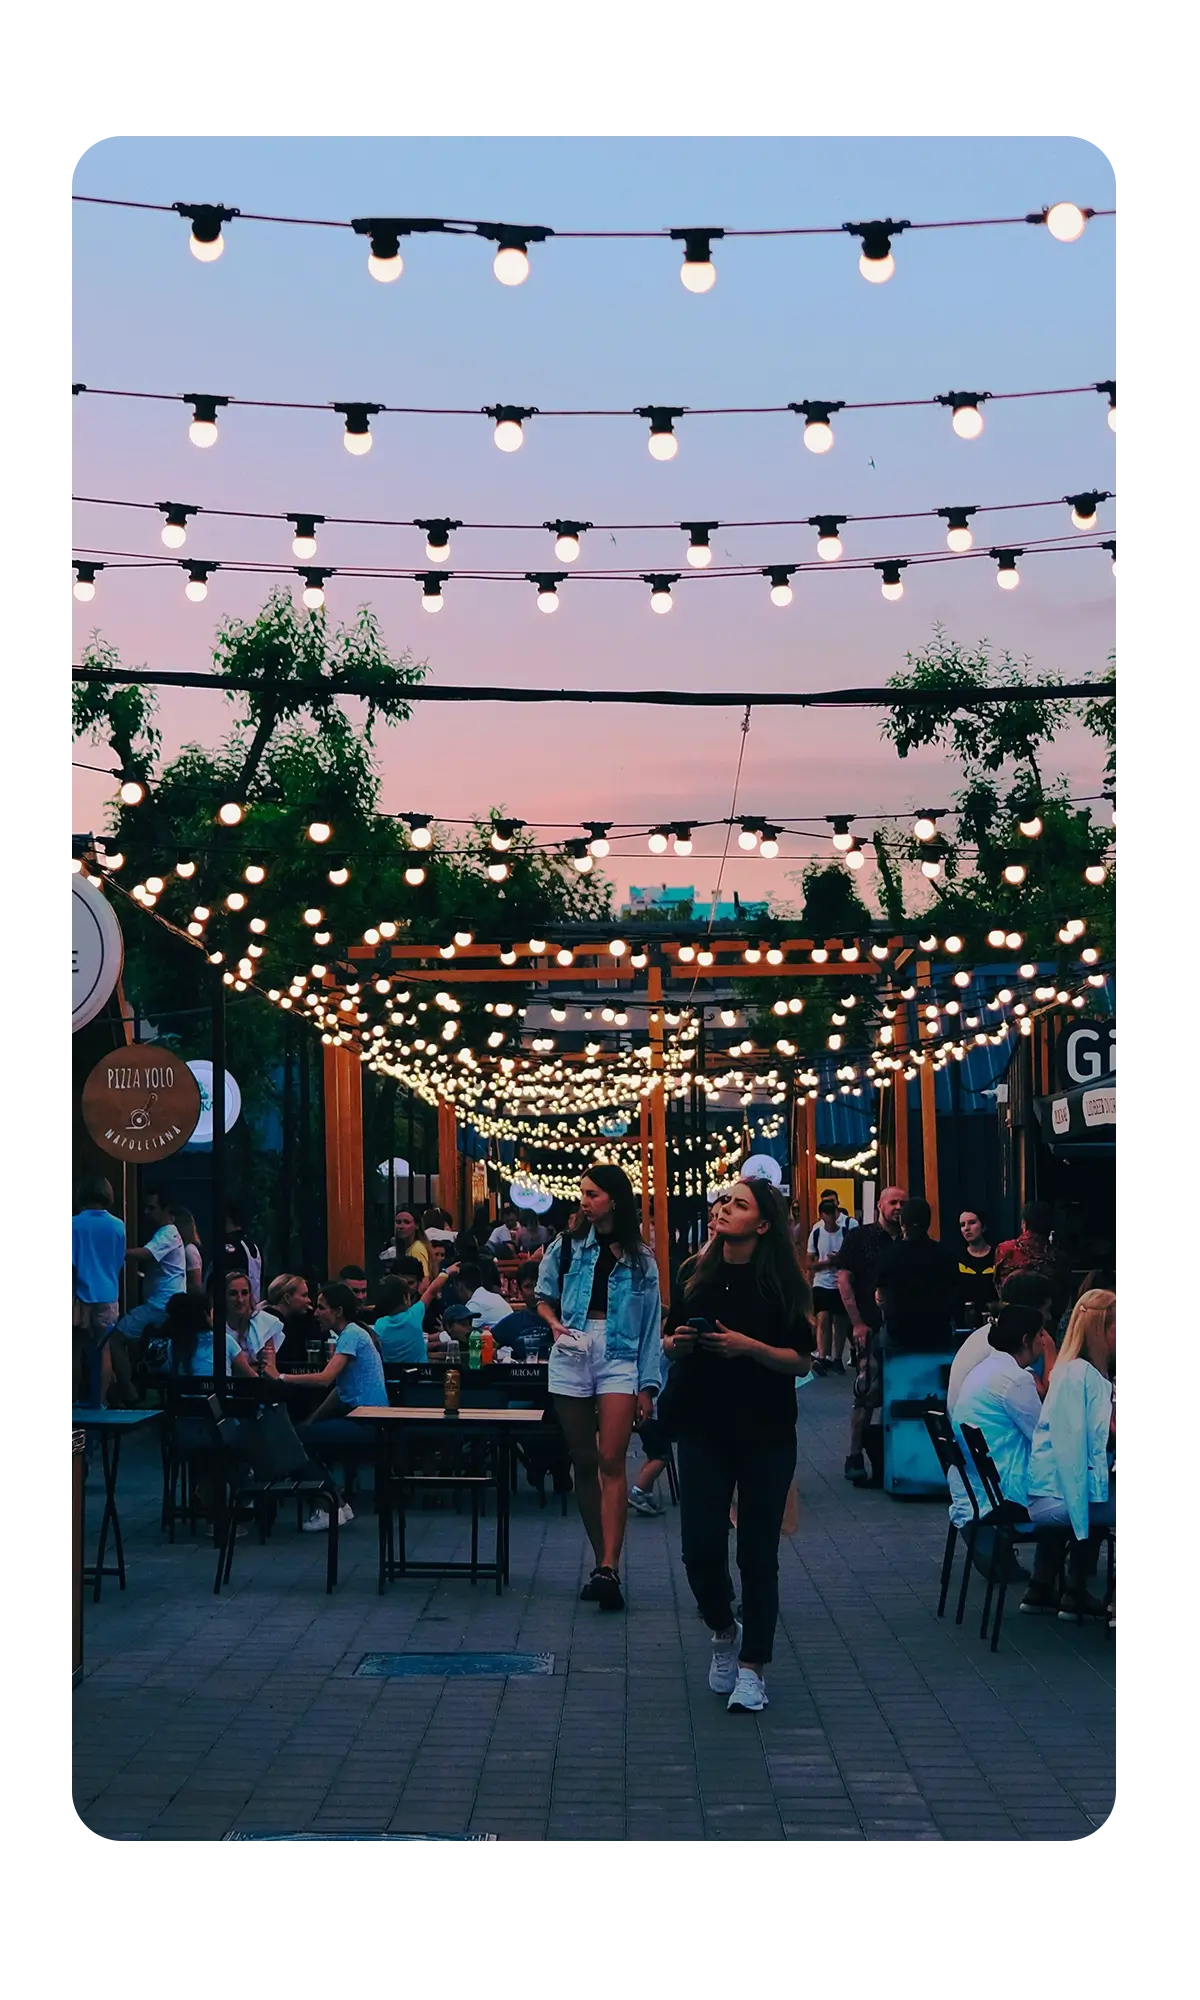 Photo of outdoor food market at dusk